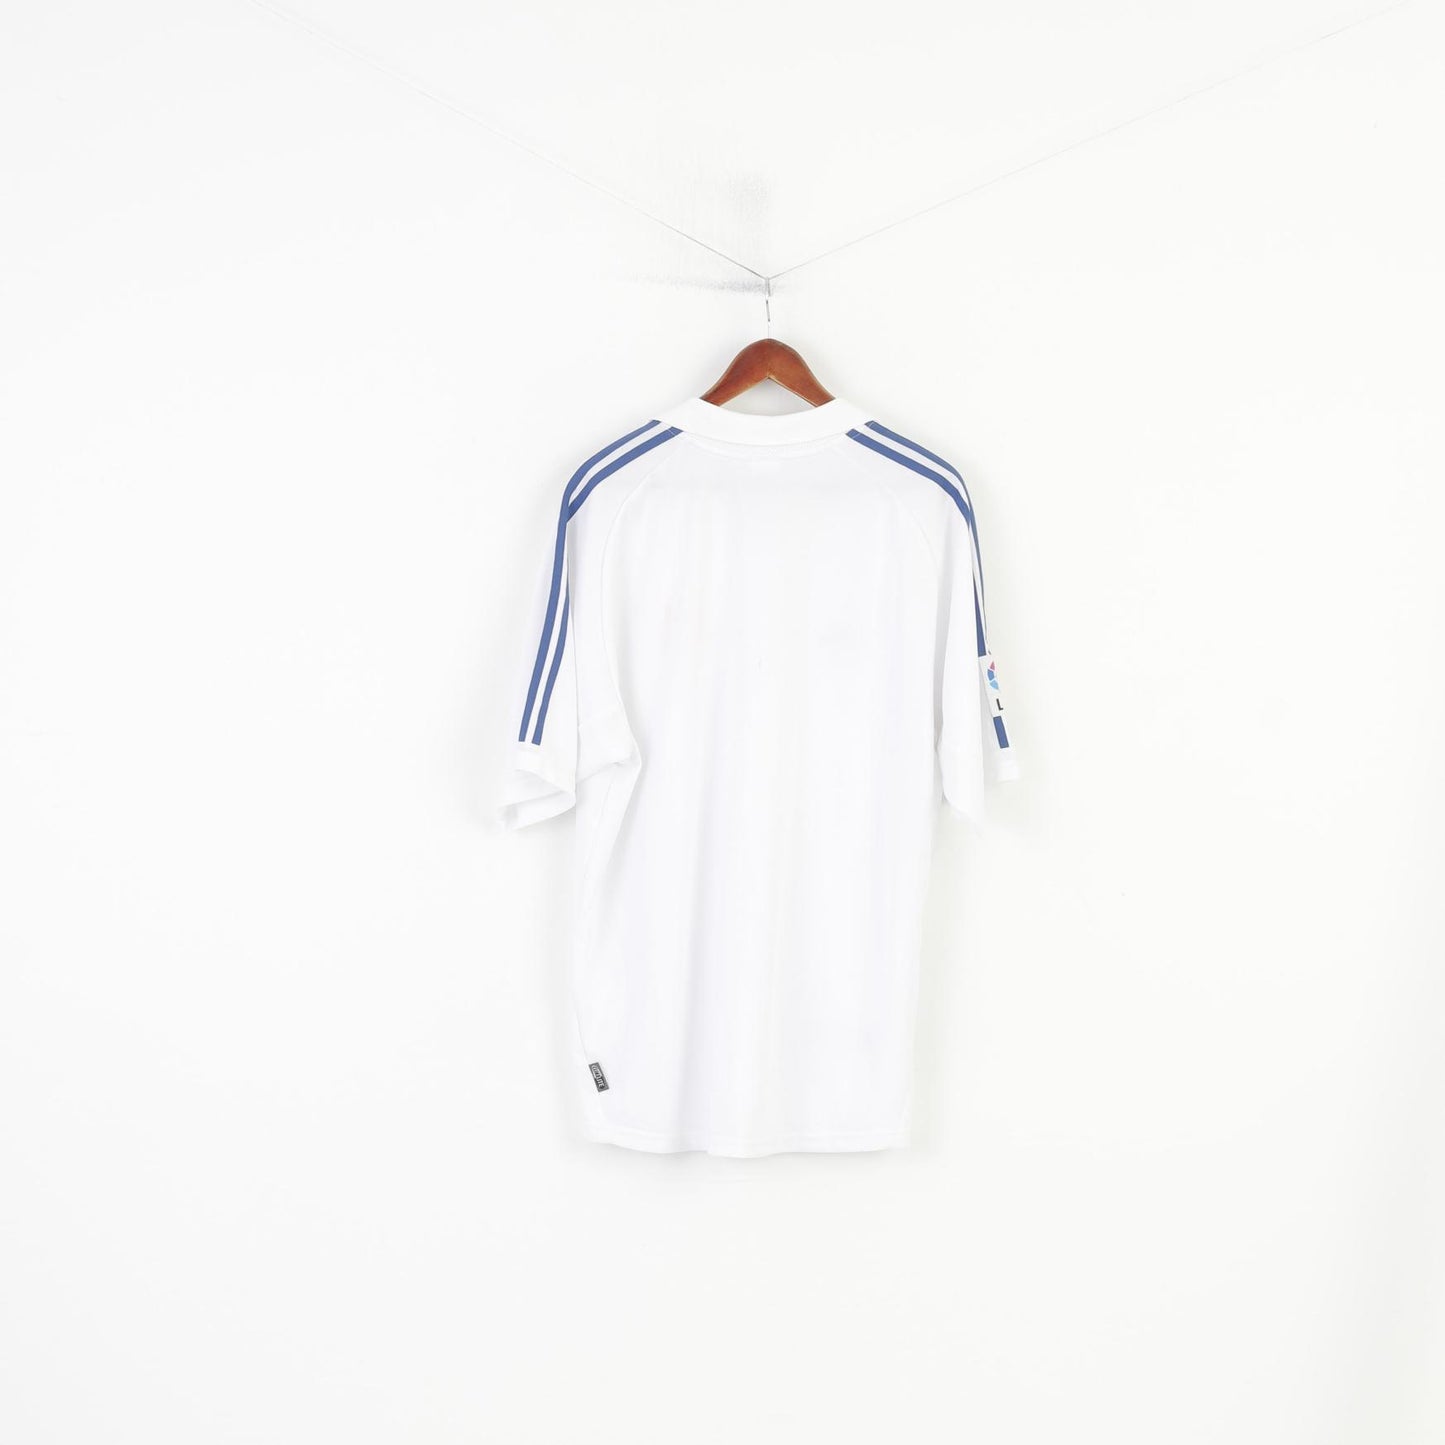 Adidas Men XL Shirt Football Club Real Madryt MCF Soccer White Sportswear Rmfc Authentic Licensed Product Top